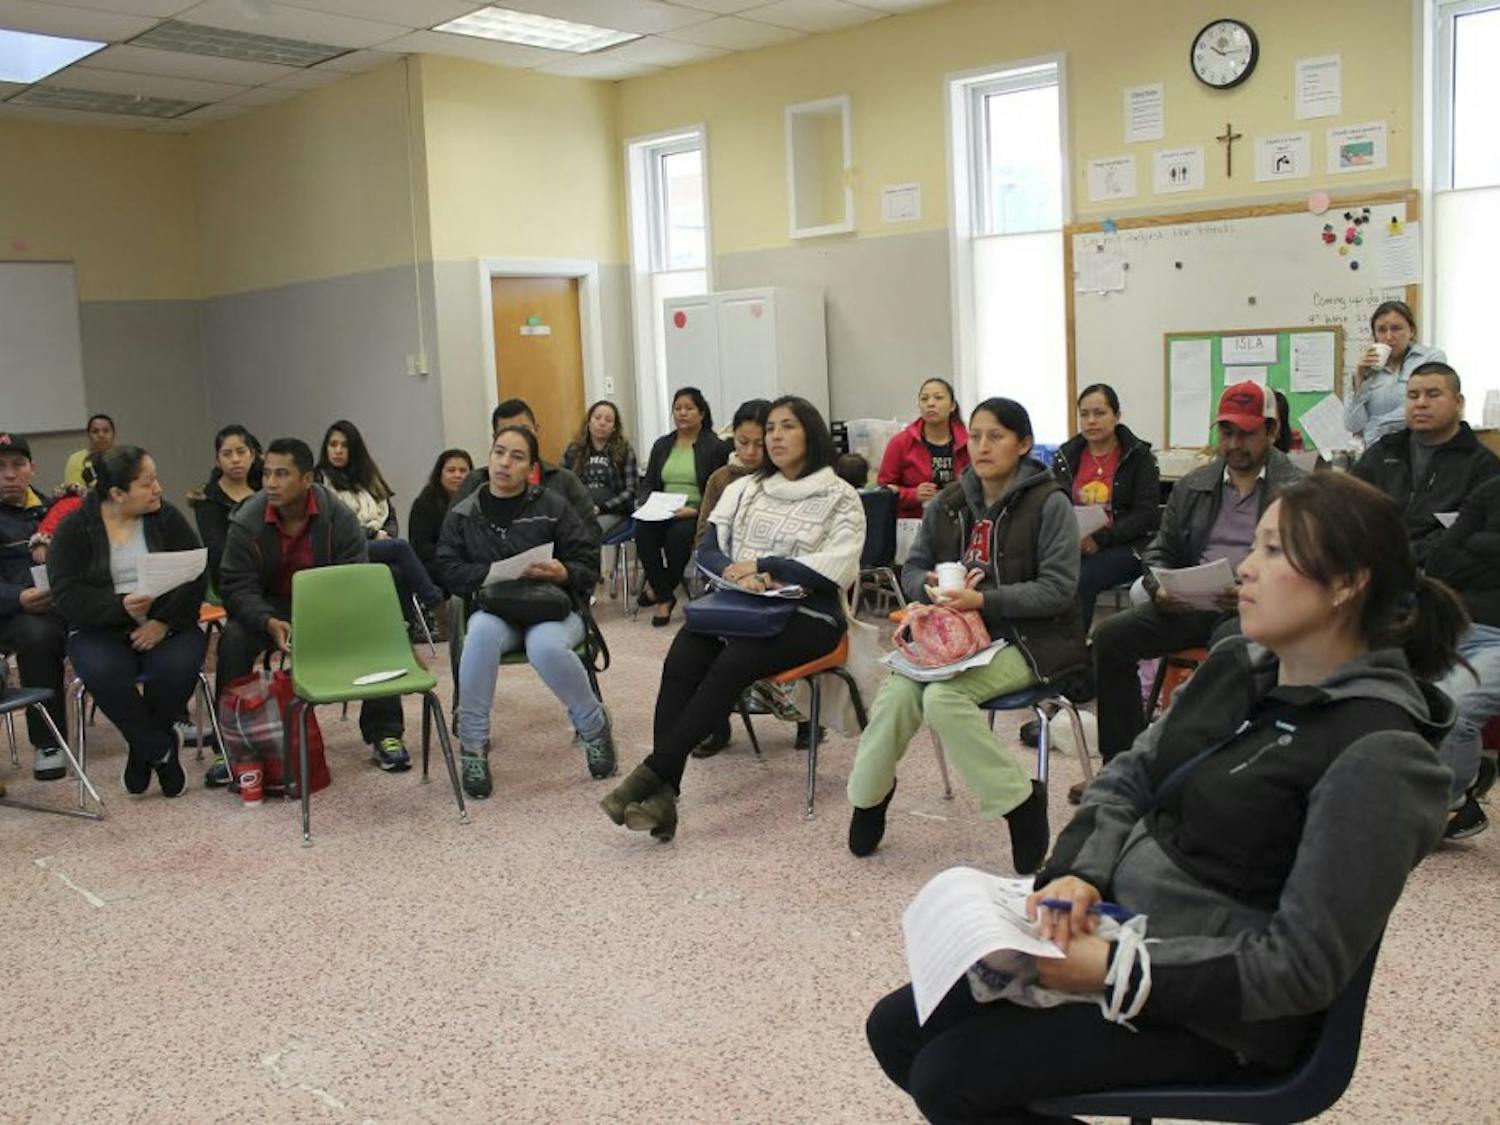 The Chapel Hill nonprofit Immersion for Spanish Language Acquisition gathered to discuss immigration policies on Saturday.